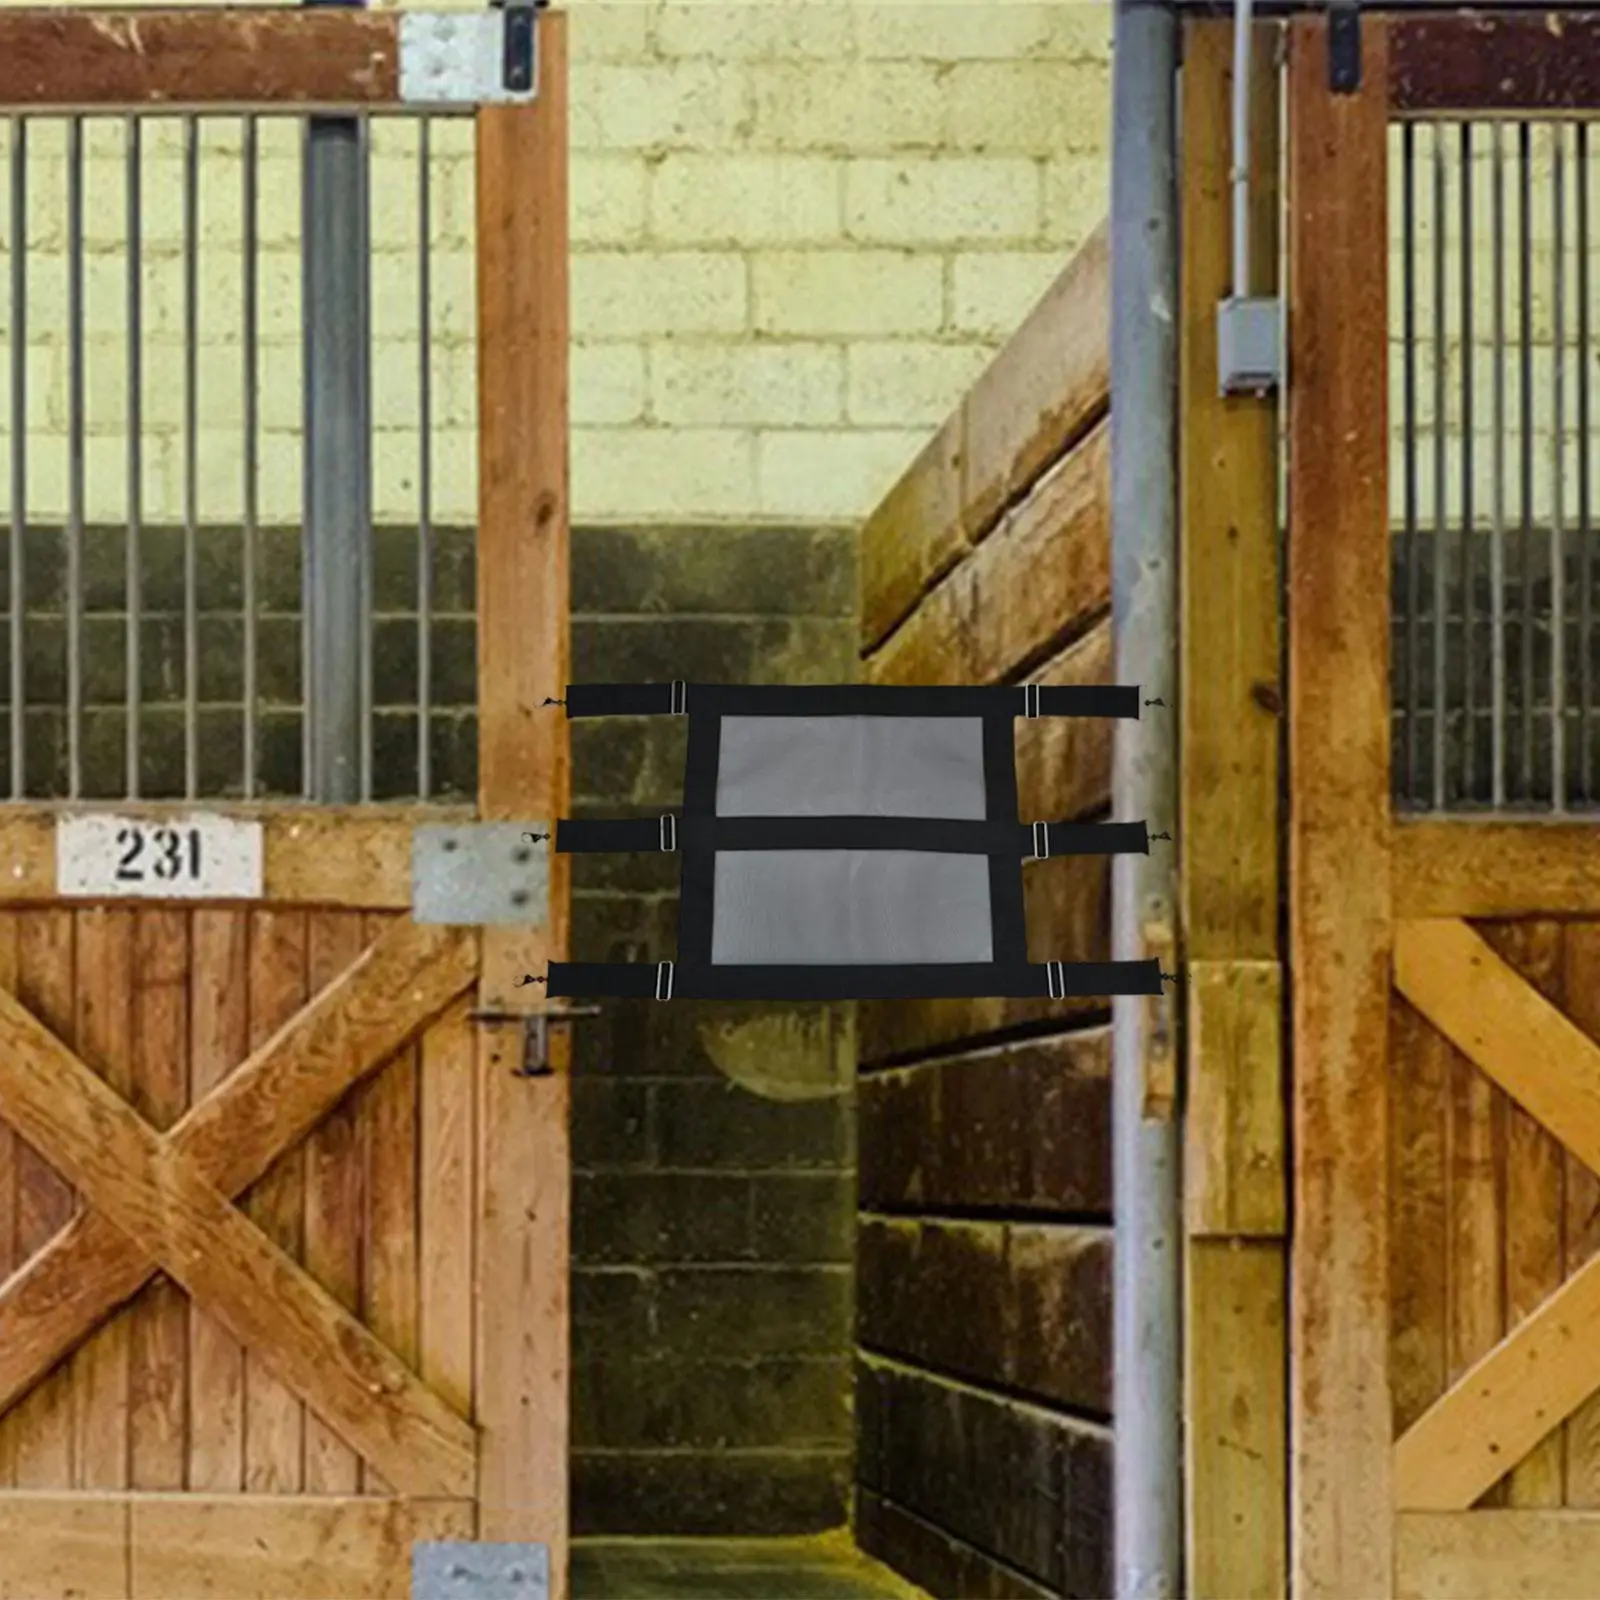 Horse Stall guard Horse and Hardware with Sturdy Hooks Air flow Mesh Extra Wide